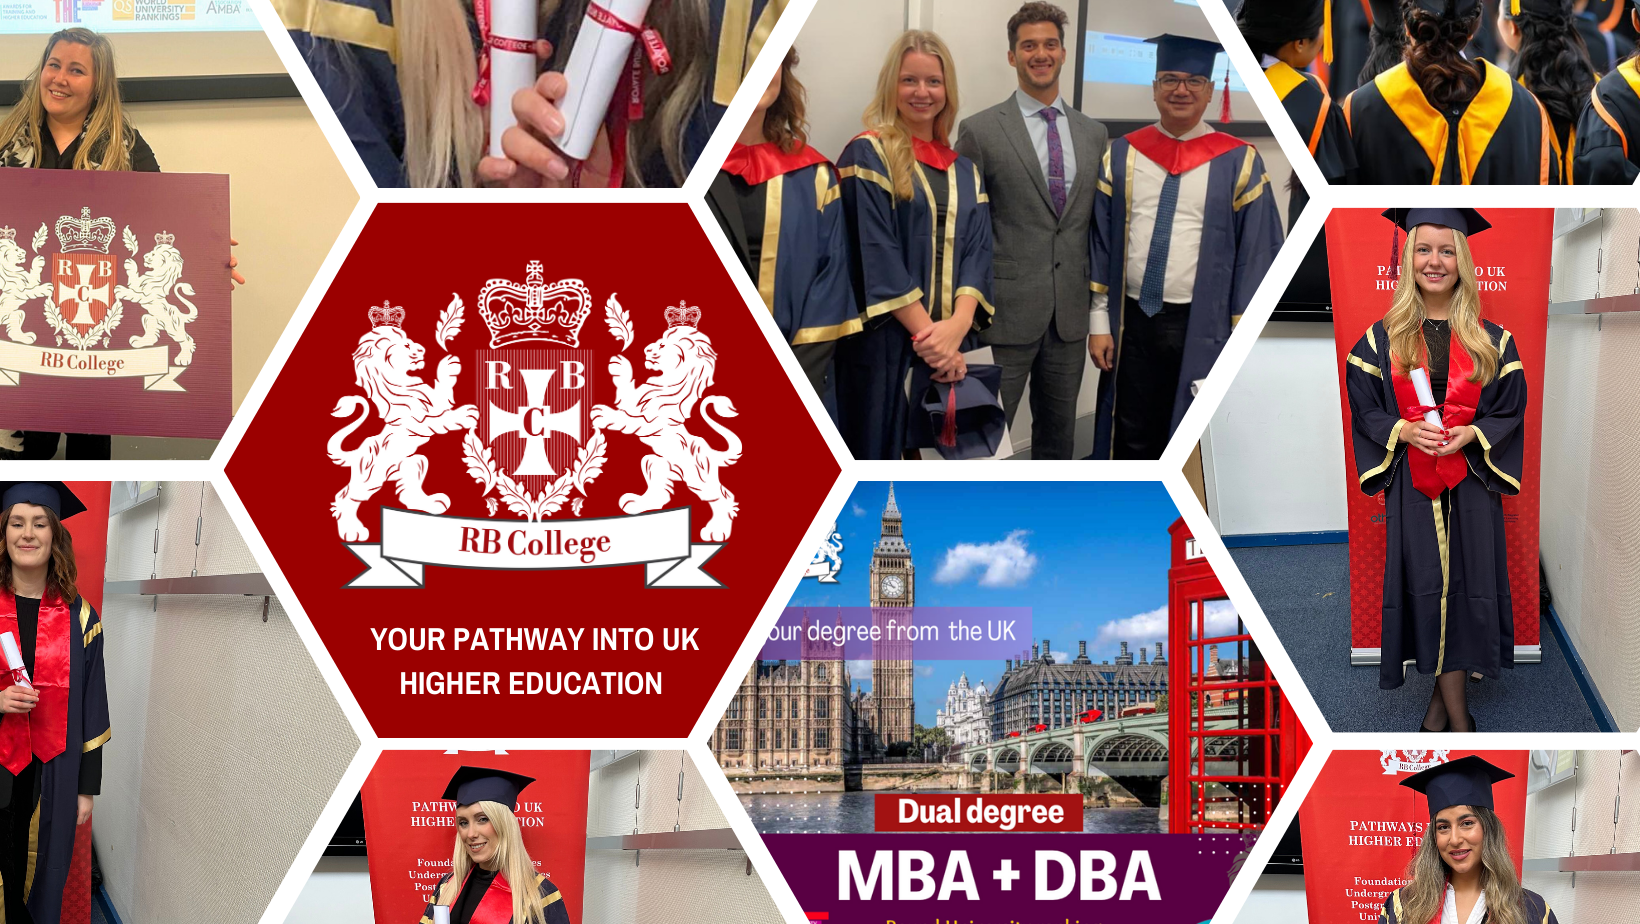 Royale Business College UK